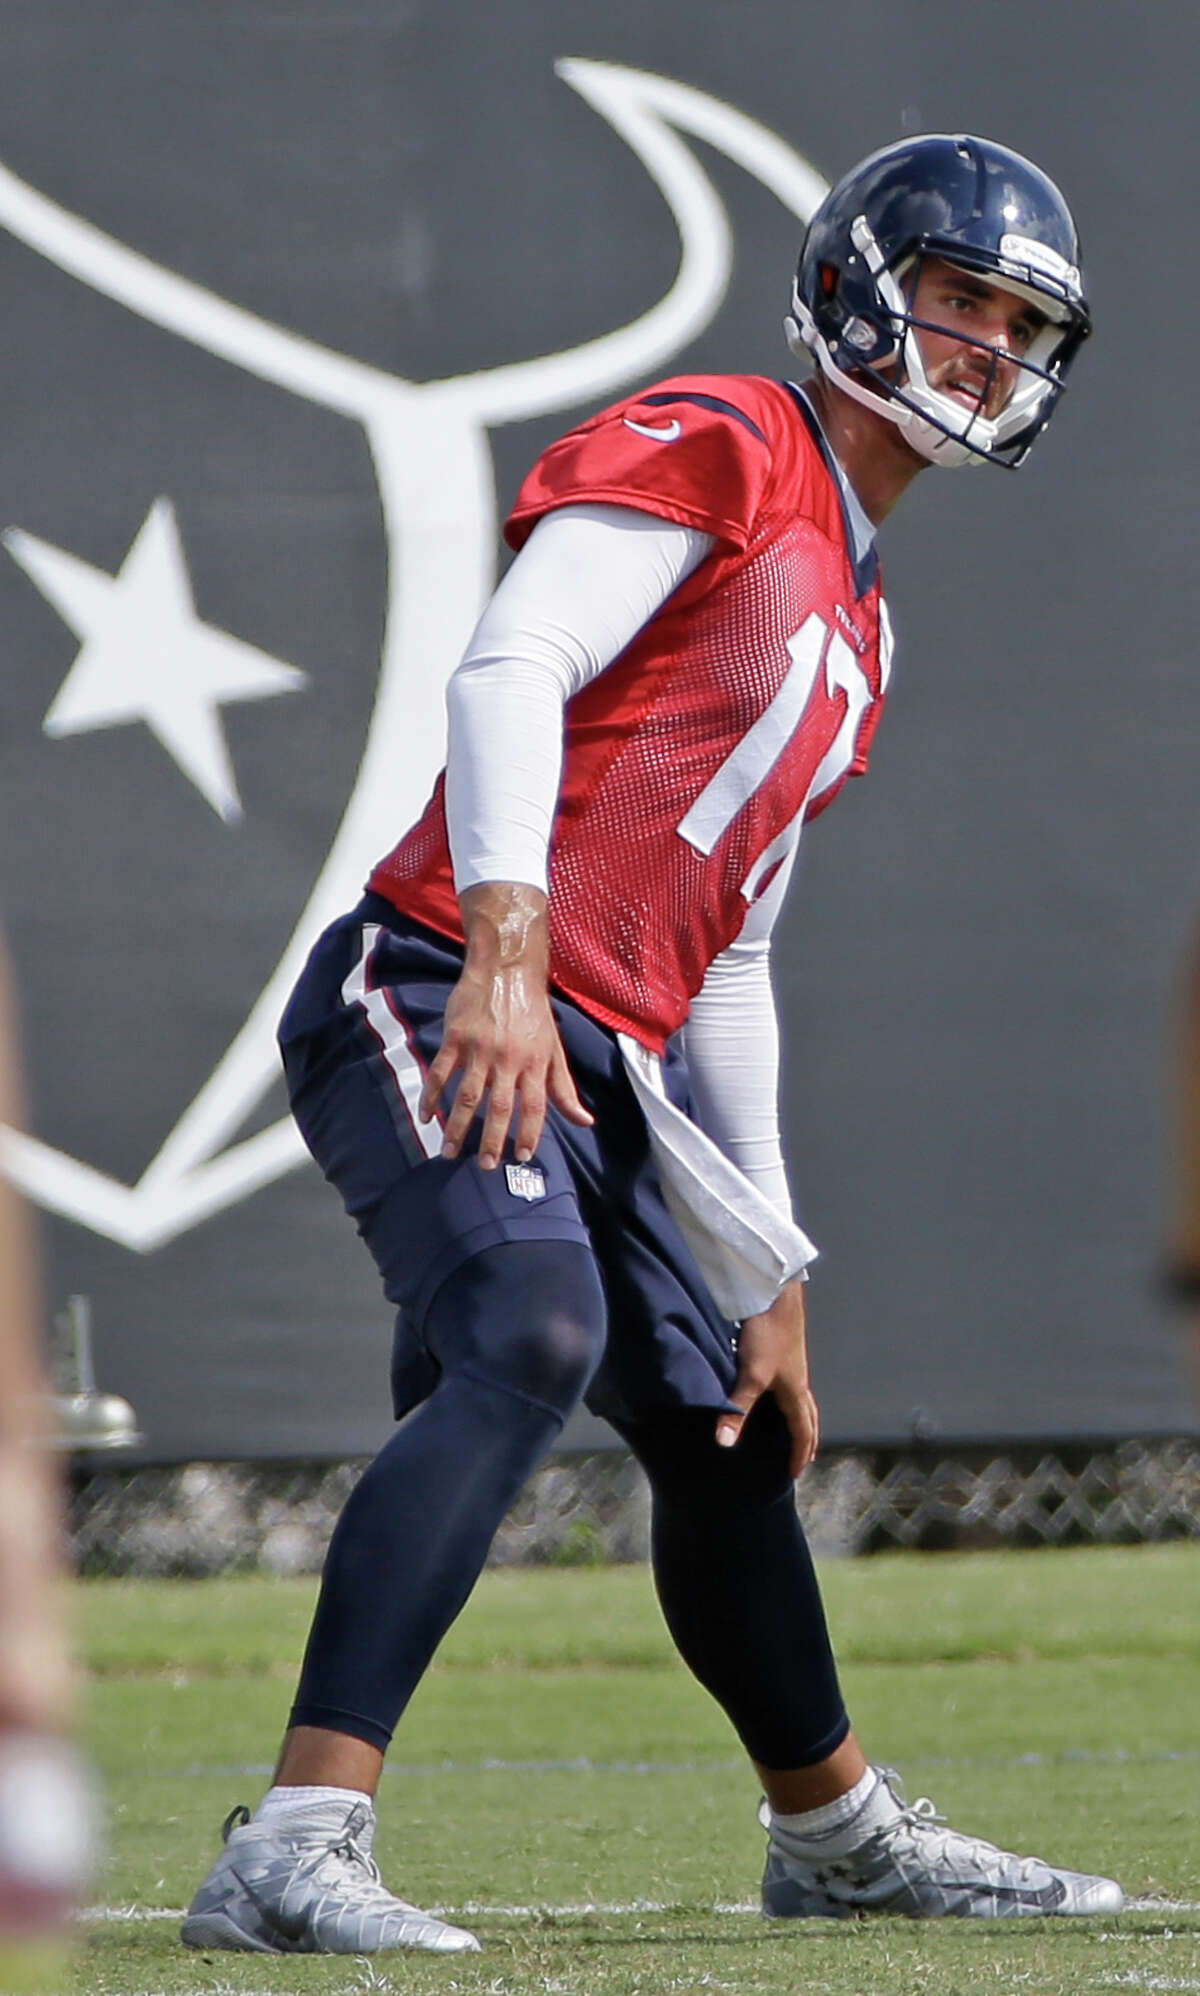 Signed to a four-year, $72 million contract in March as the replacement for Brian Hoyer, Osweiler has proven to be a quick study so far in terms of absorbing knowledge about a complex playbook authored by O’Brien and offensive coordinator George Godsey. Godsey has been building chemistry with Hopkins and the other receivers and doing a nice job of fitting into the locker room. The real litmus tests will come in the regular season when the towering quarterback faces blitzes and disguised coverages. The book on Osweiler is still being written because he only had seven career starts for the Denver Broncos, winning five of them last season for the Super Bowl champions before being replaced by Peyton Manning. Given the opportunity to build his own legacy with a new team, Osweiler is eager to prove himself.